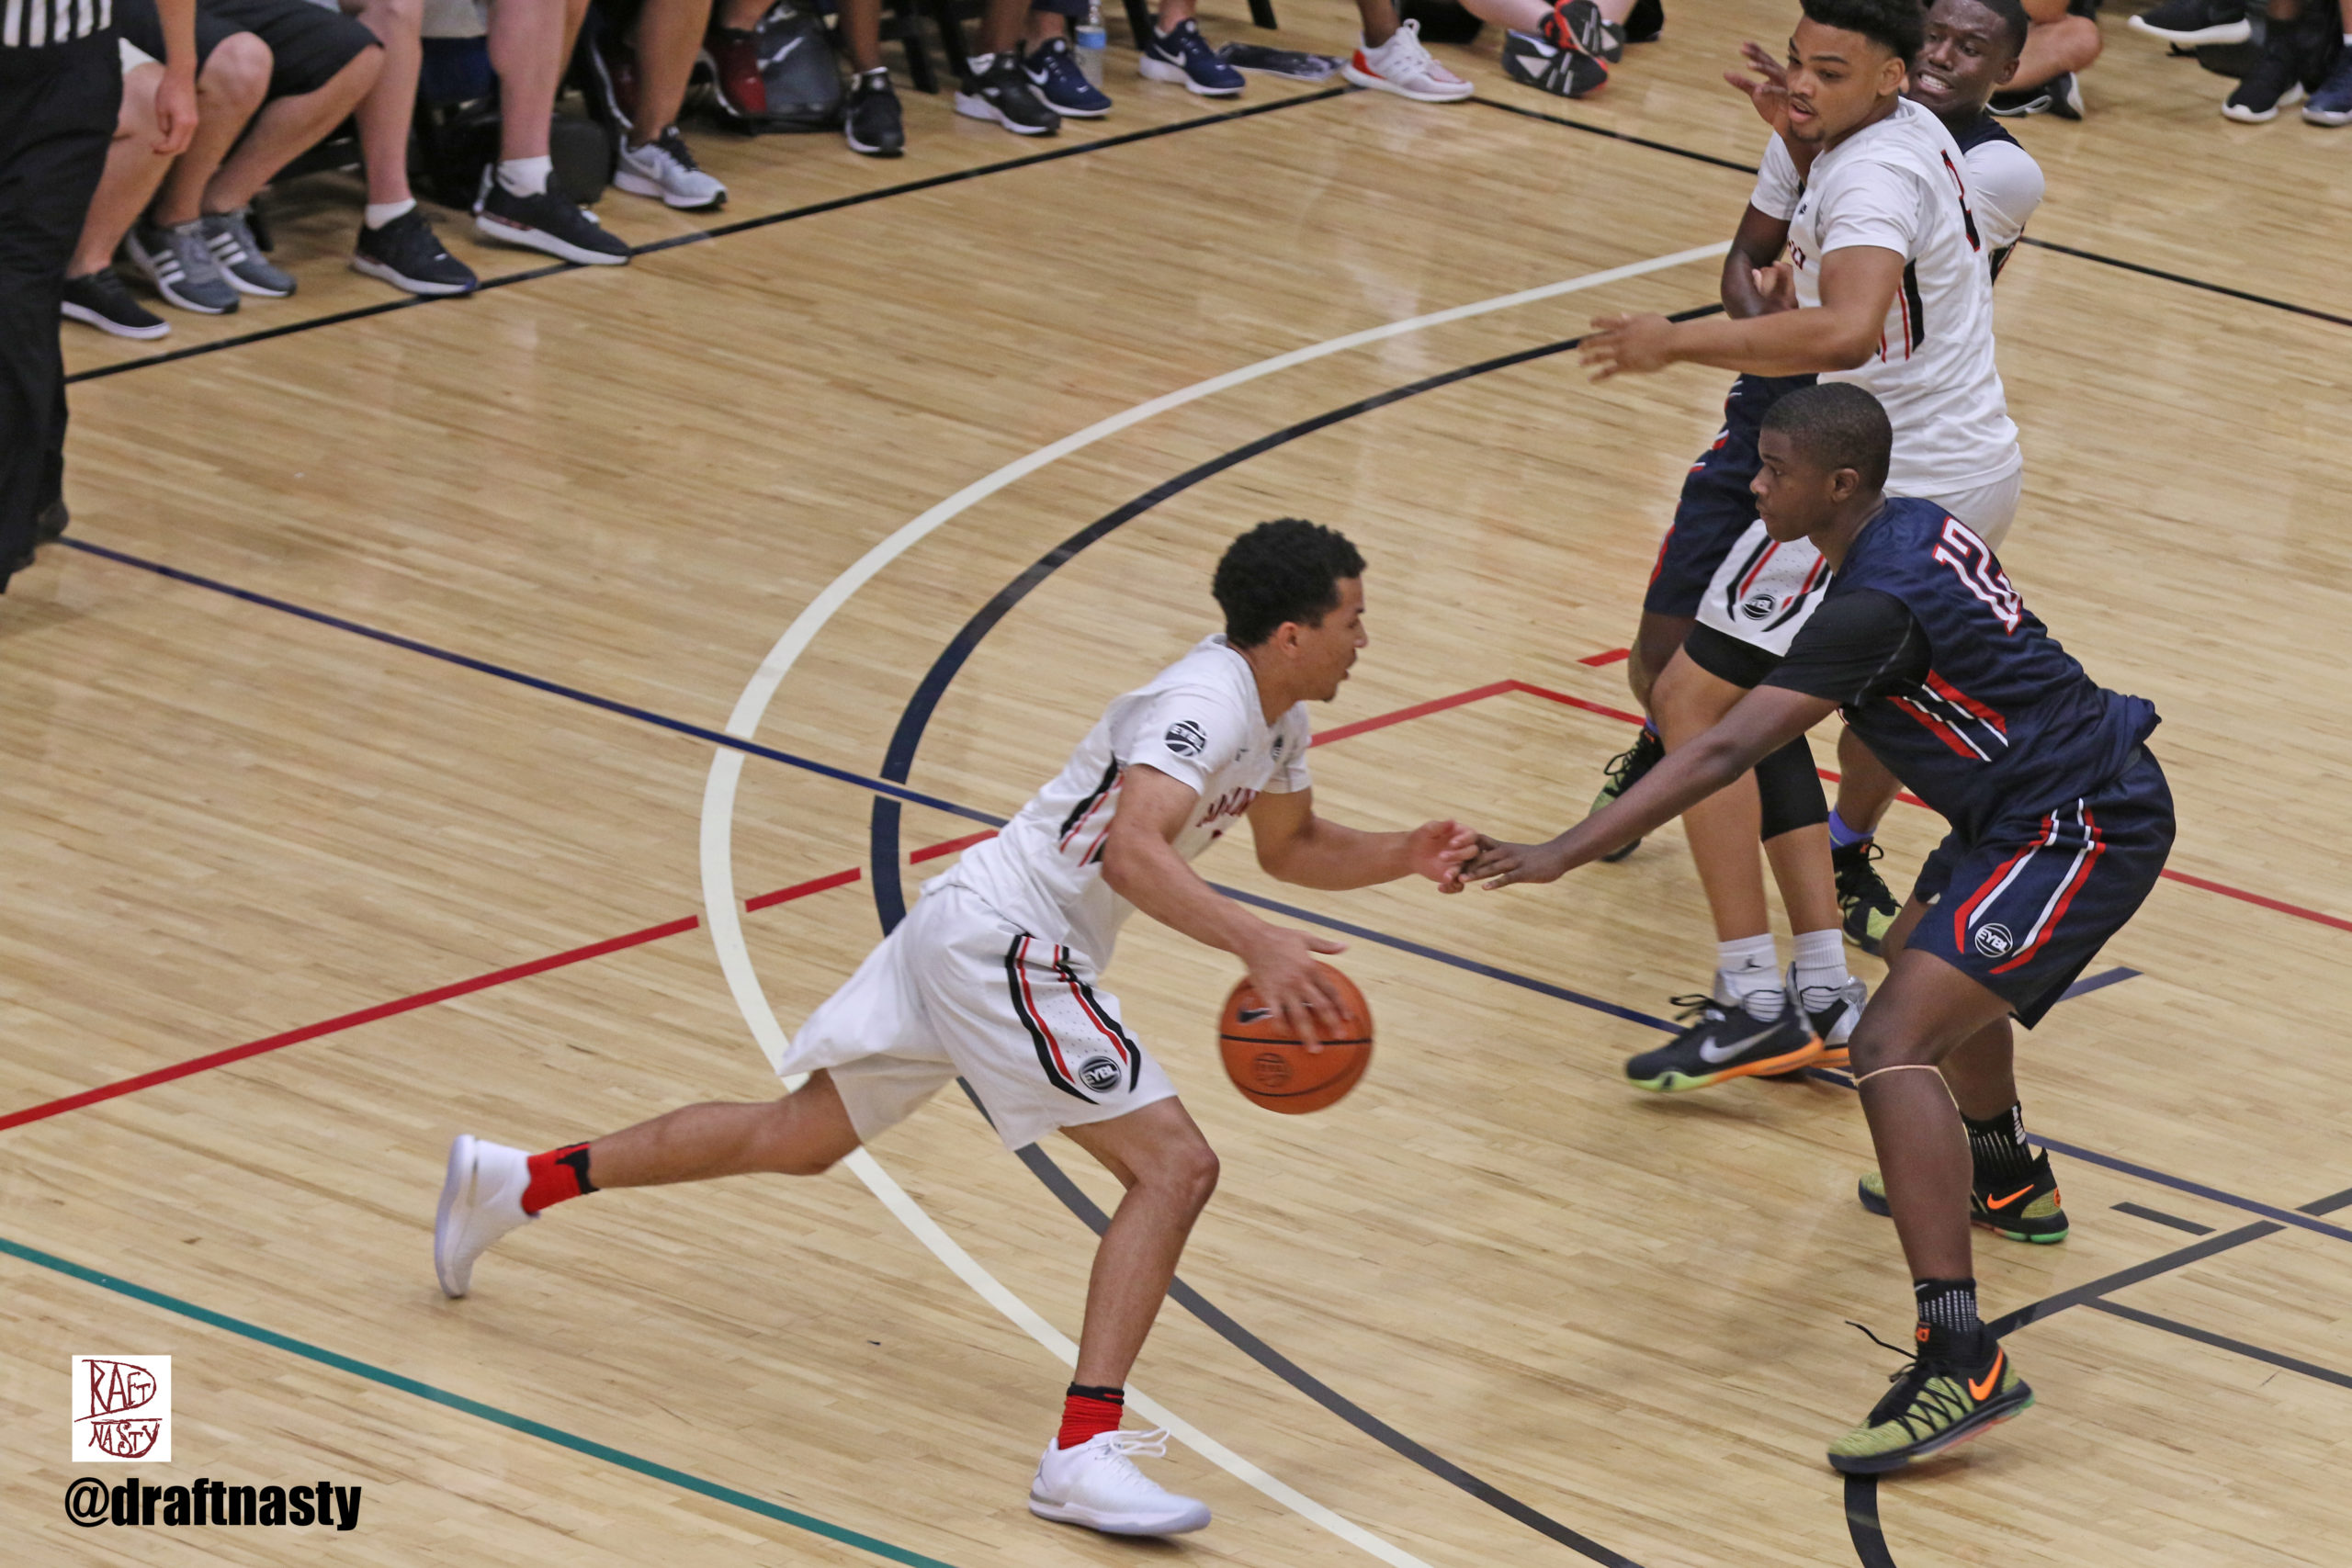 UNC recruiting: Cole Anthony, the No. 3 player in the nation 